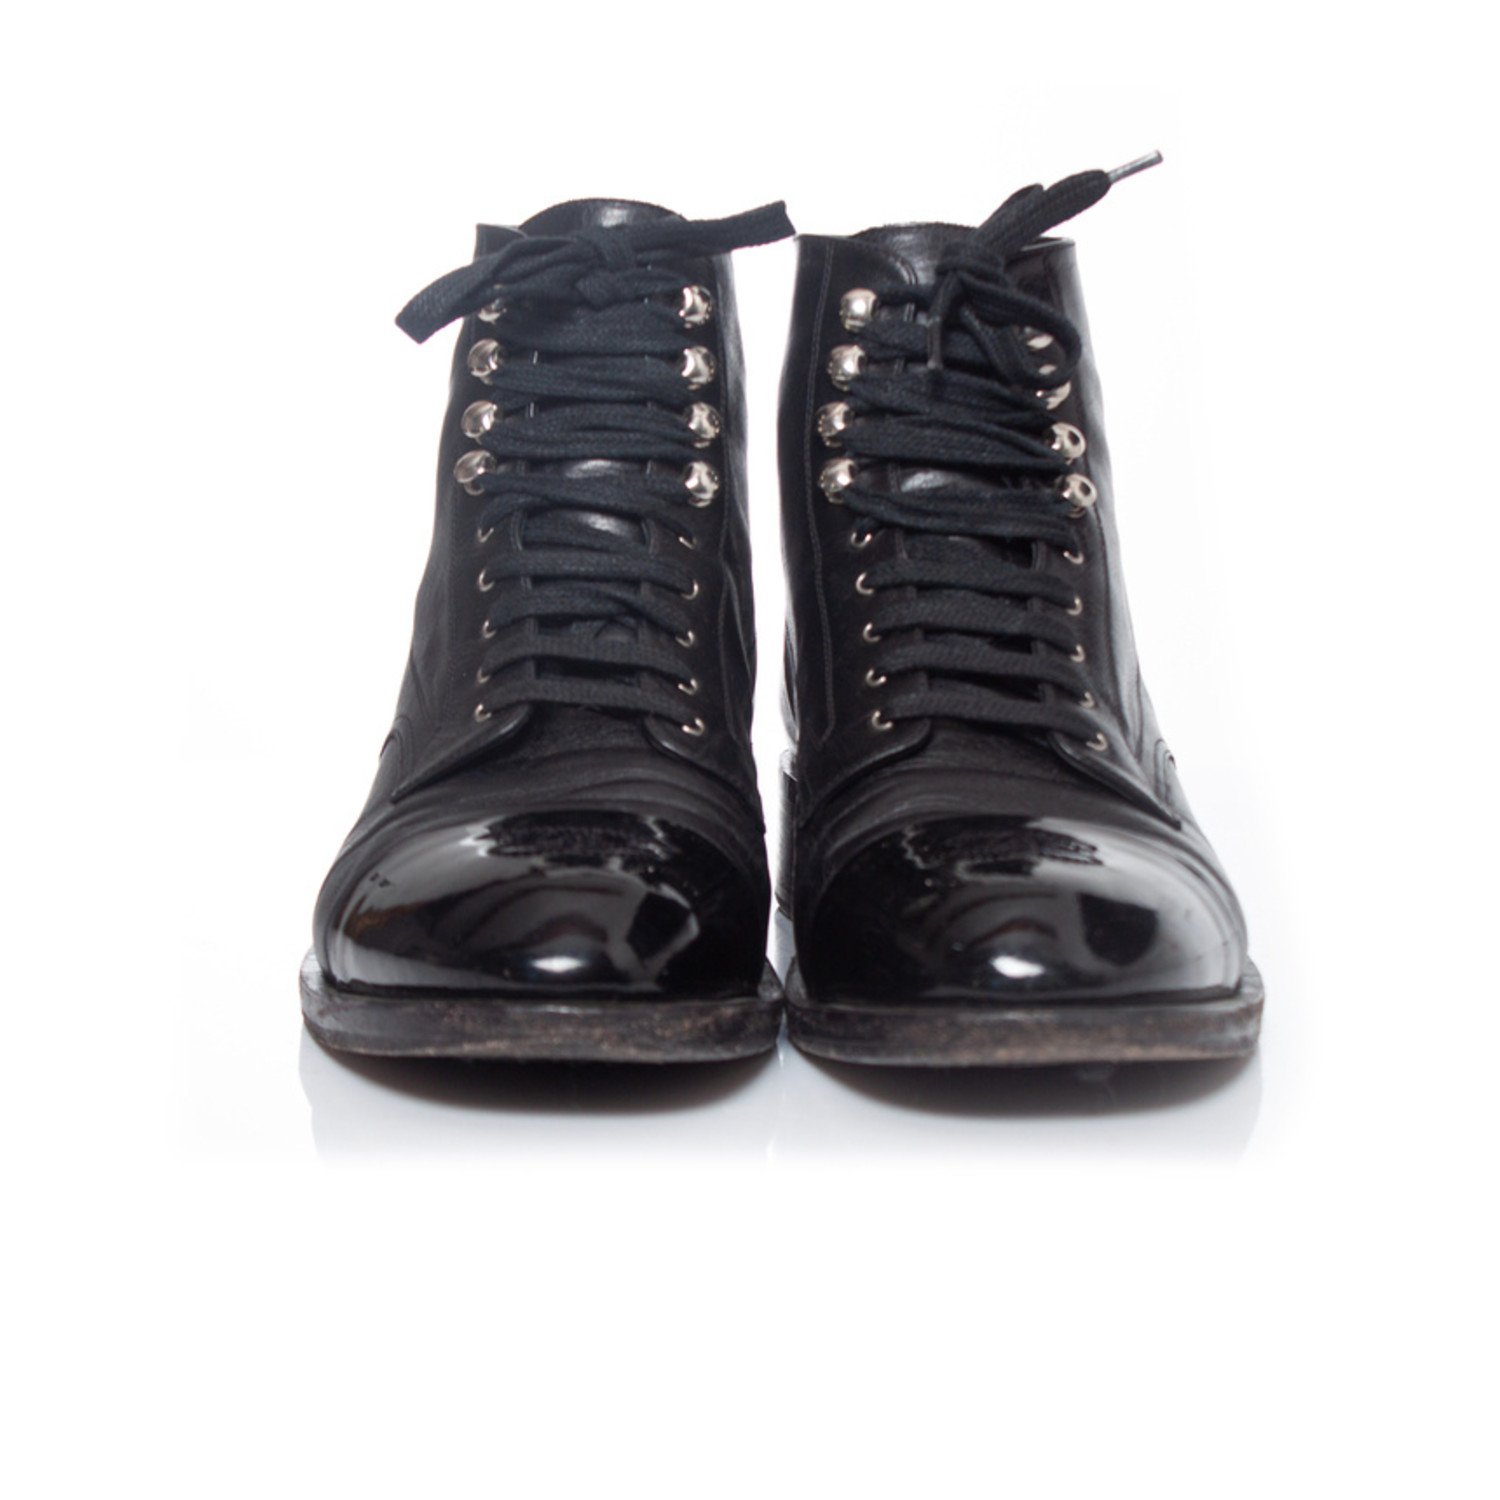 AUTHENTIC CHANEL SHINY Calfskin Quilted Lace Up Combat Boots 38